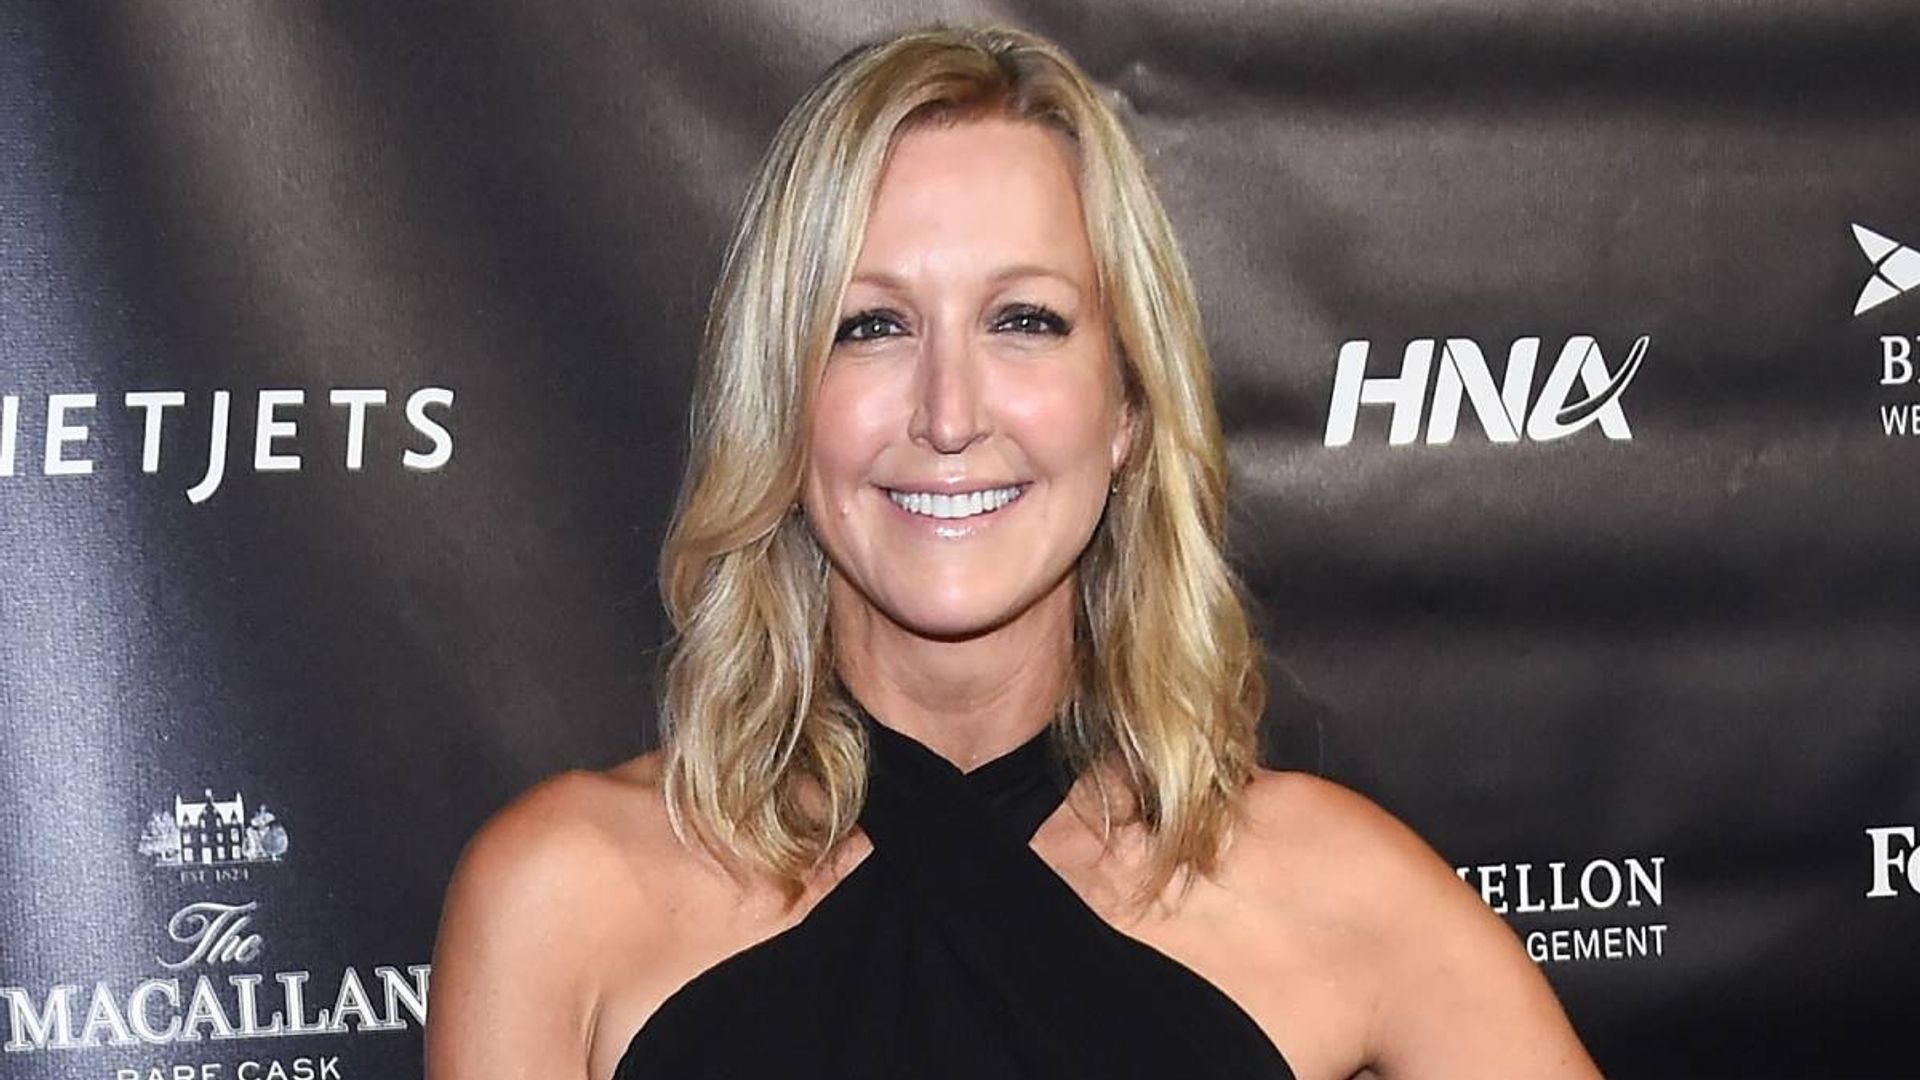 GMA’s Lara Spencer impresses fans with daring swimsuit video – and her cheekiest photo yet!